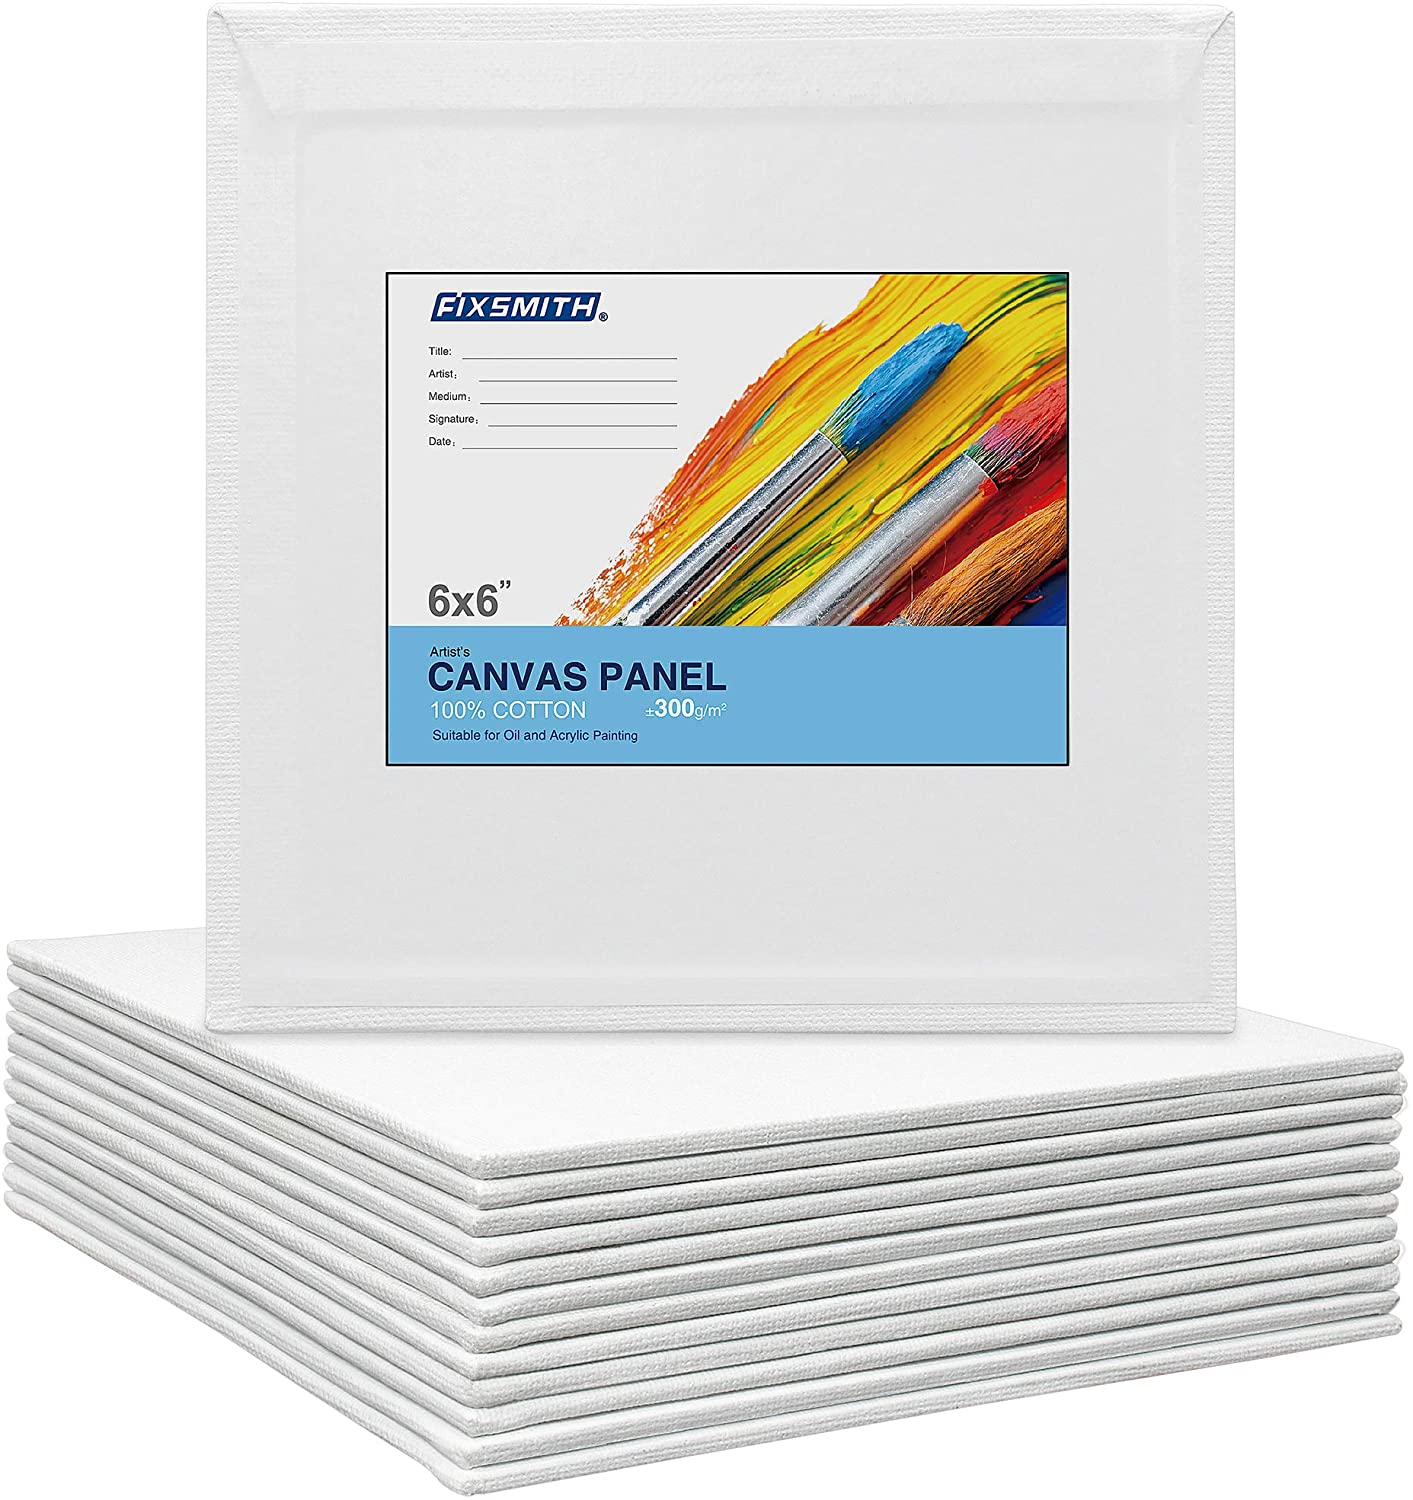 FIXSMITH Gesso Hand Stretched Mini Canvas, 12-Pack